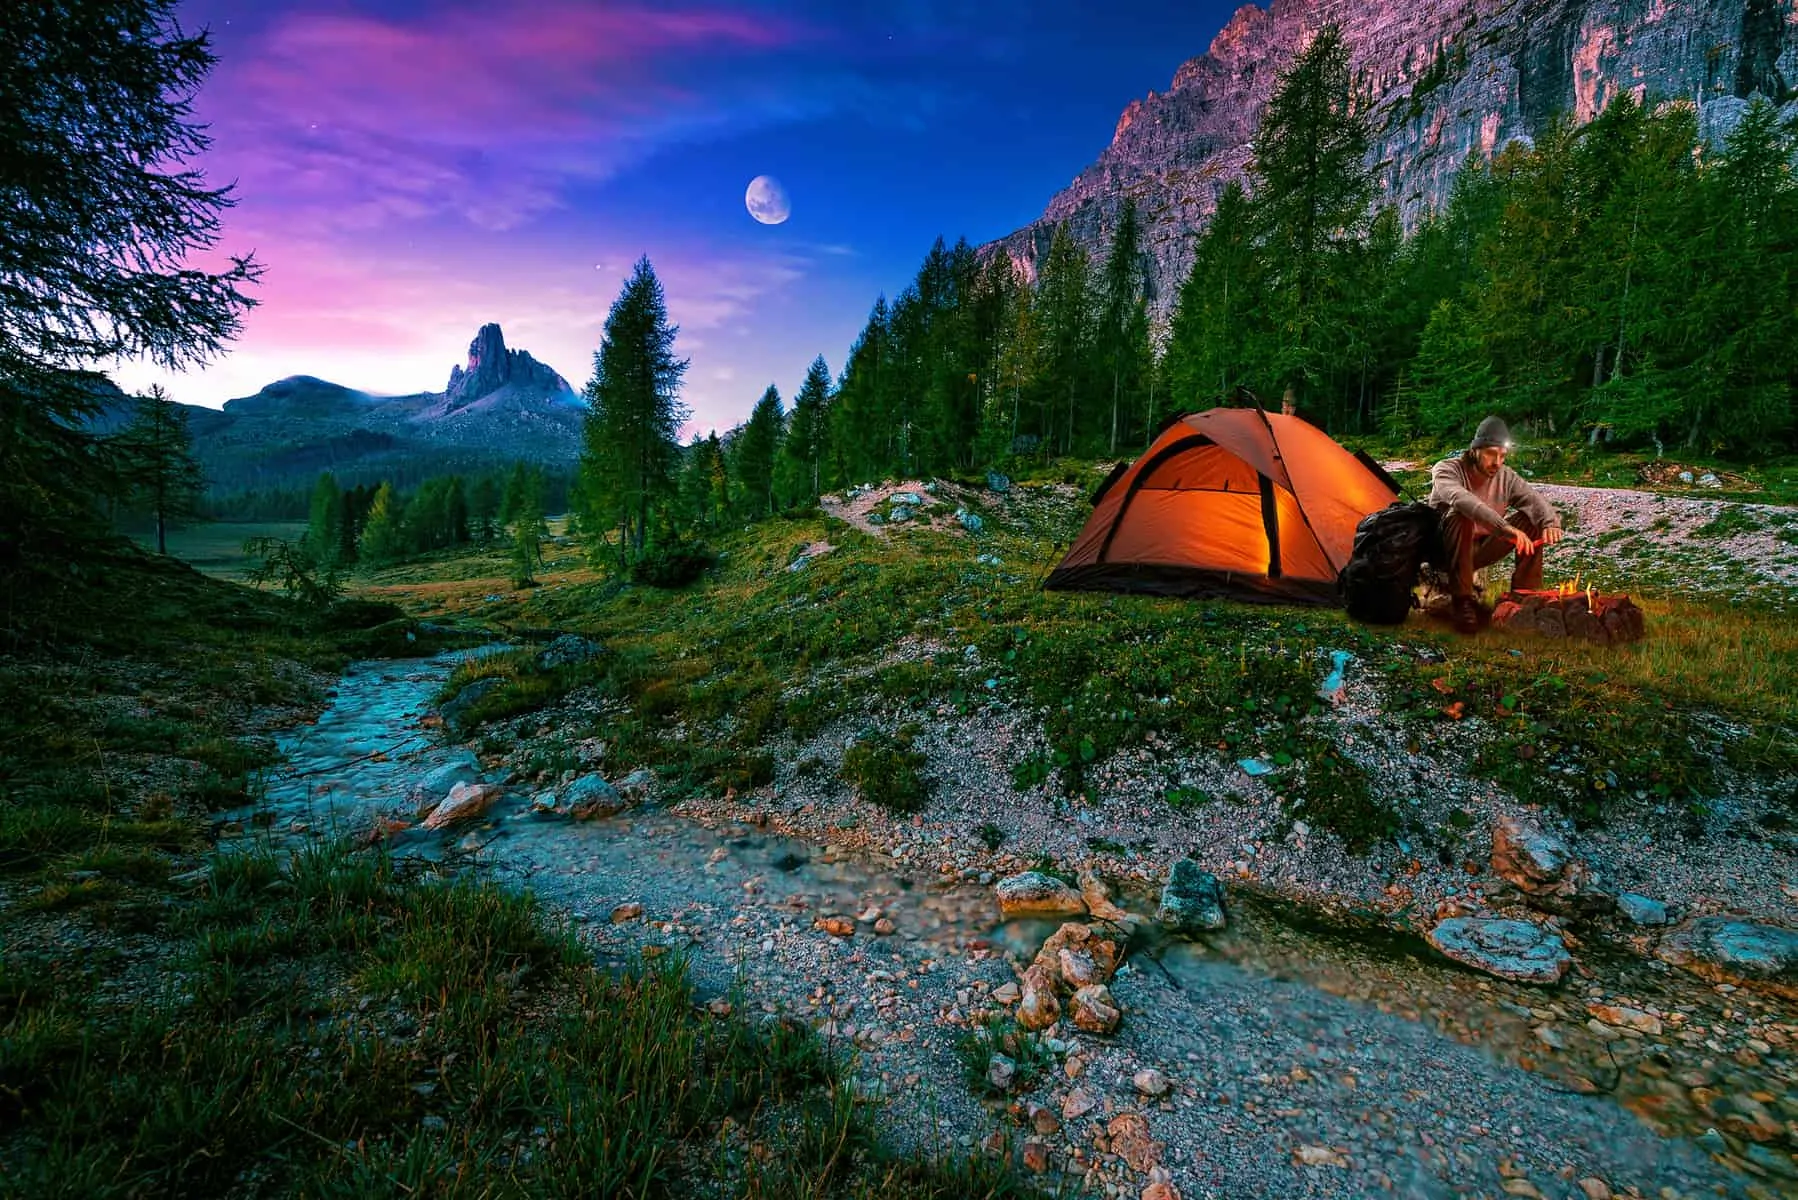 Camping is also experiencing nature like never before